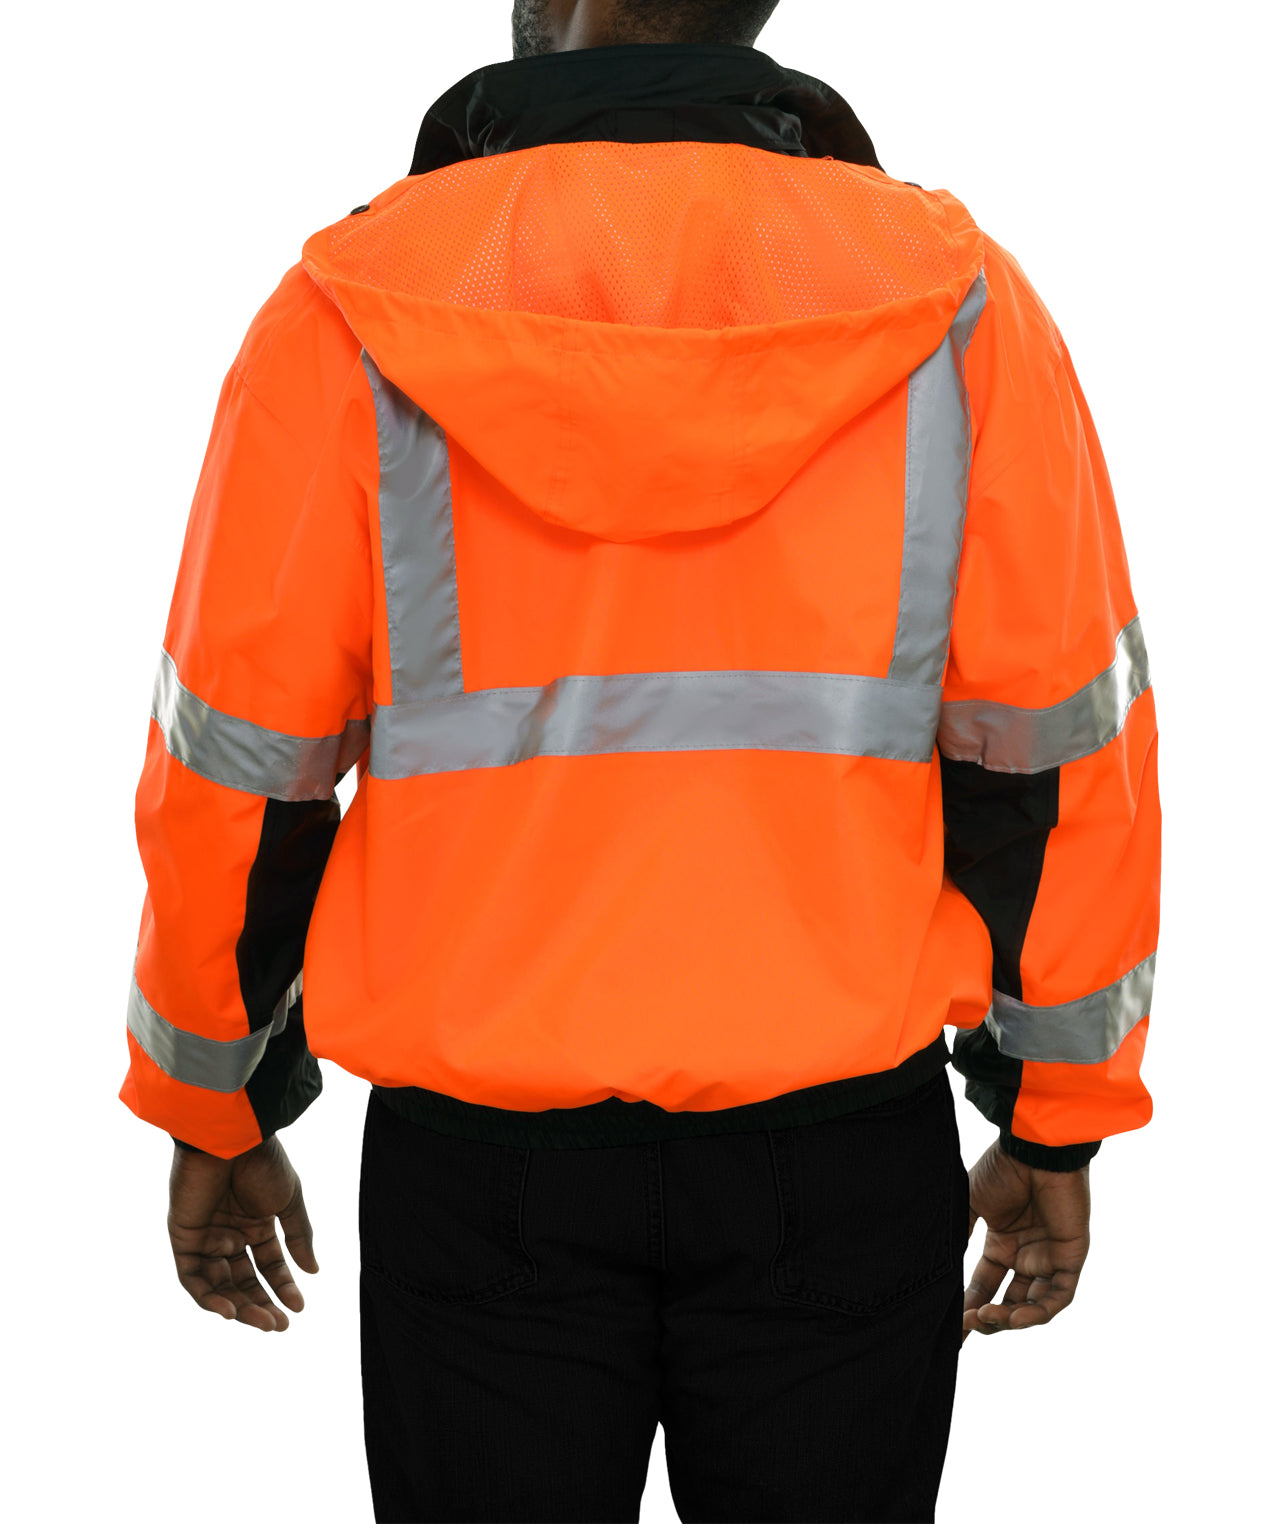 Orange High Visibility Breathable Unisex Safety Jacket For Construction Use  at Best Price in Pardi | Laxmi Safety Products